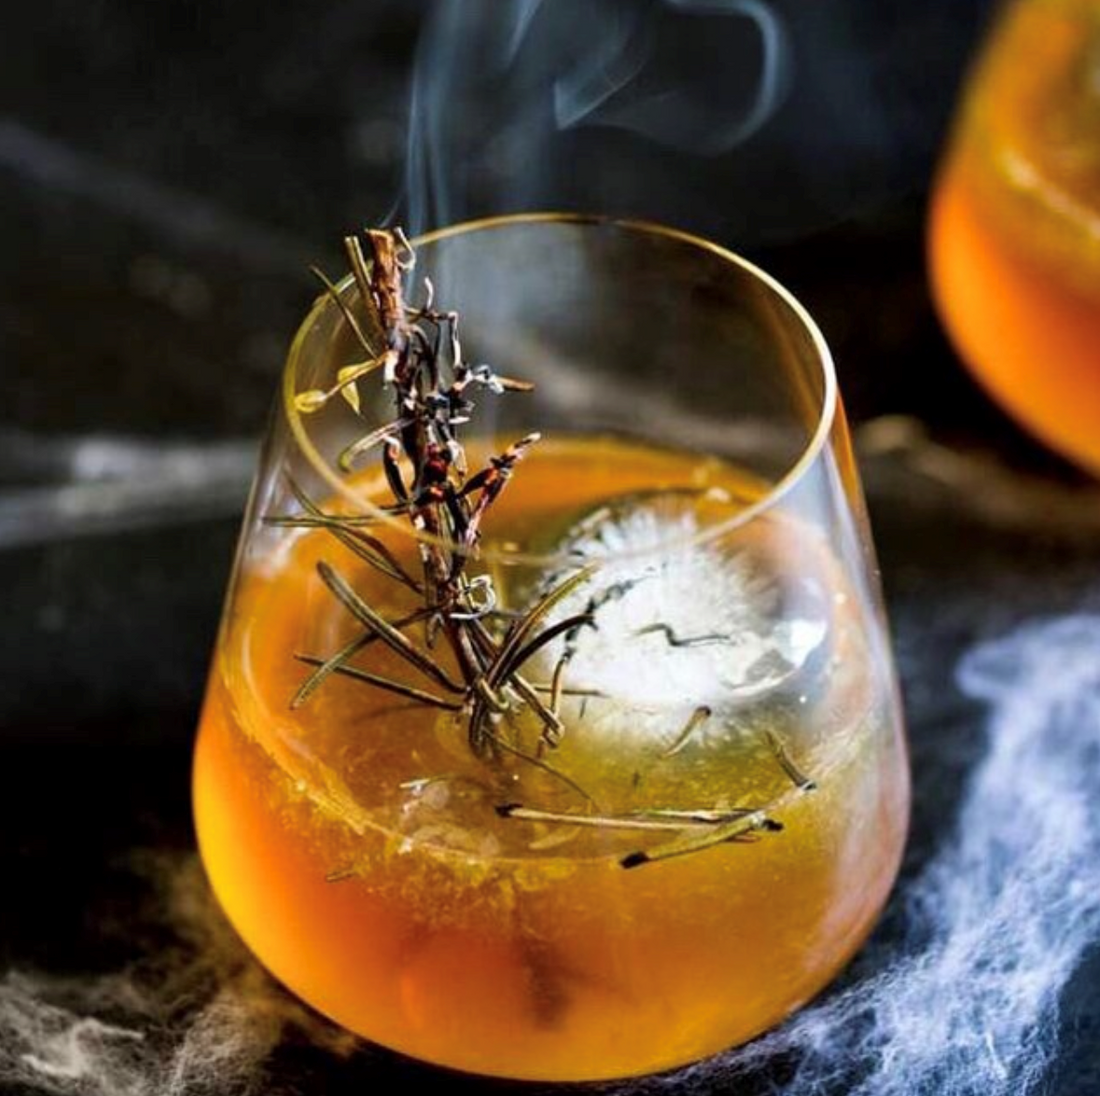 Orange cocktail garnished with a sprig of rosemary. Made with Bourbon, oranges, rosemary, and Token's Strathcona Orange Bitters.